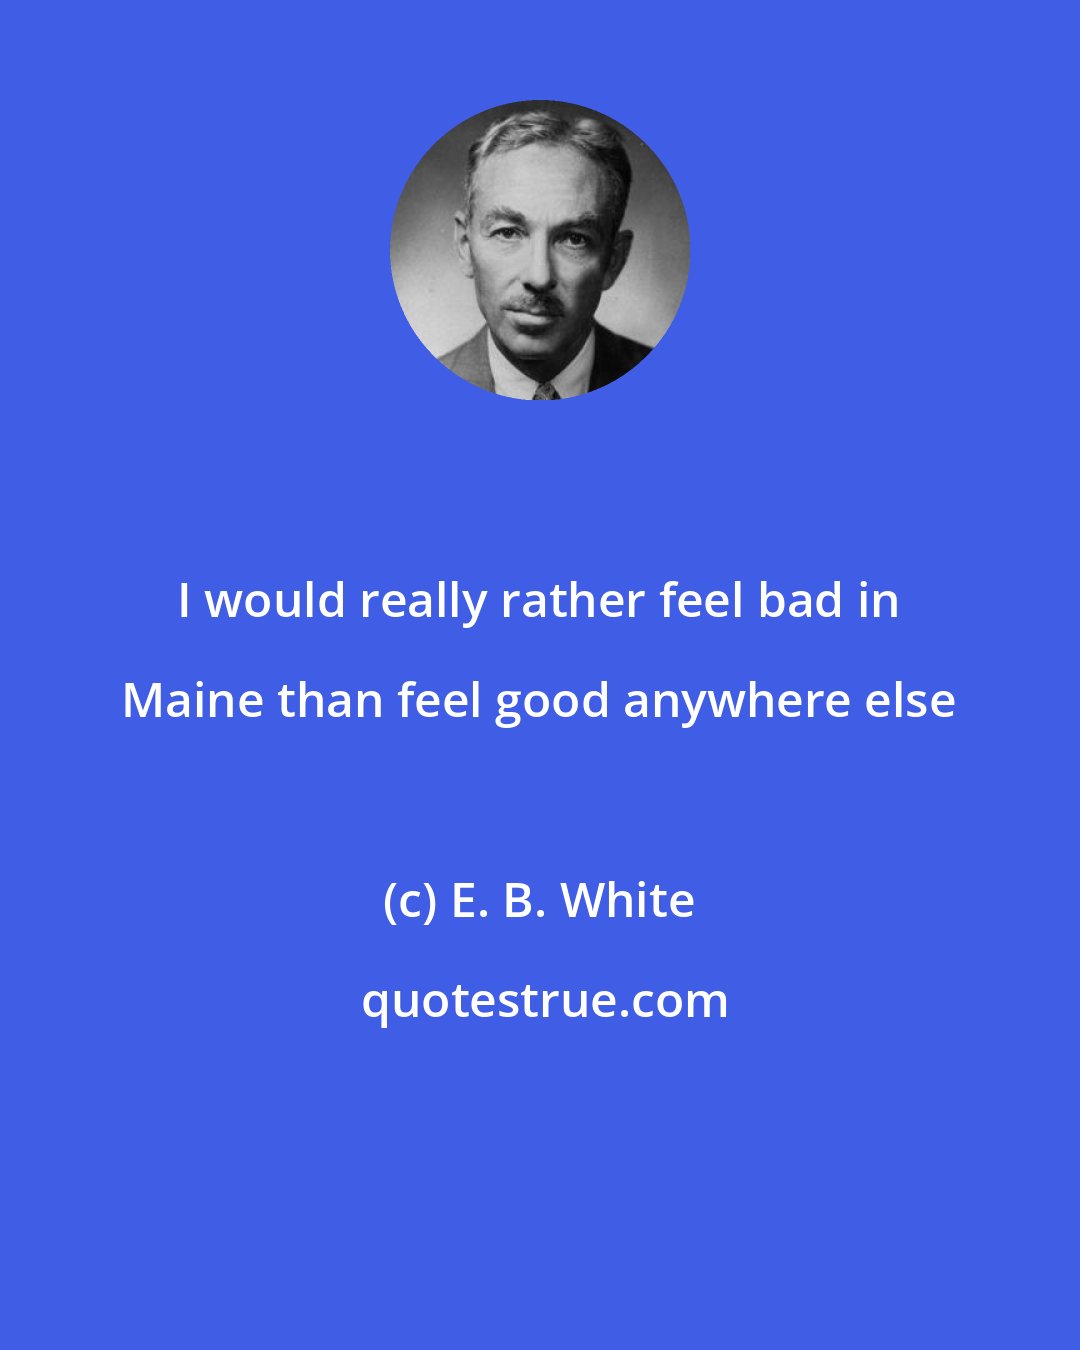 E. B. White: I would really rather feel bad in Maine than feel good anywhere else